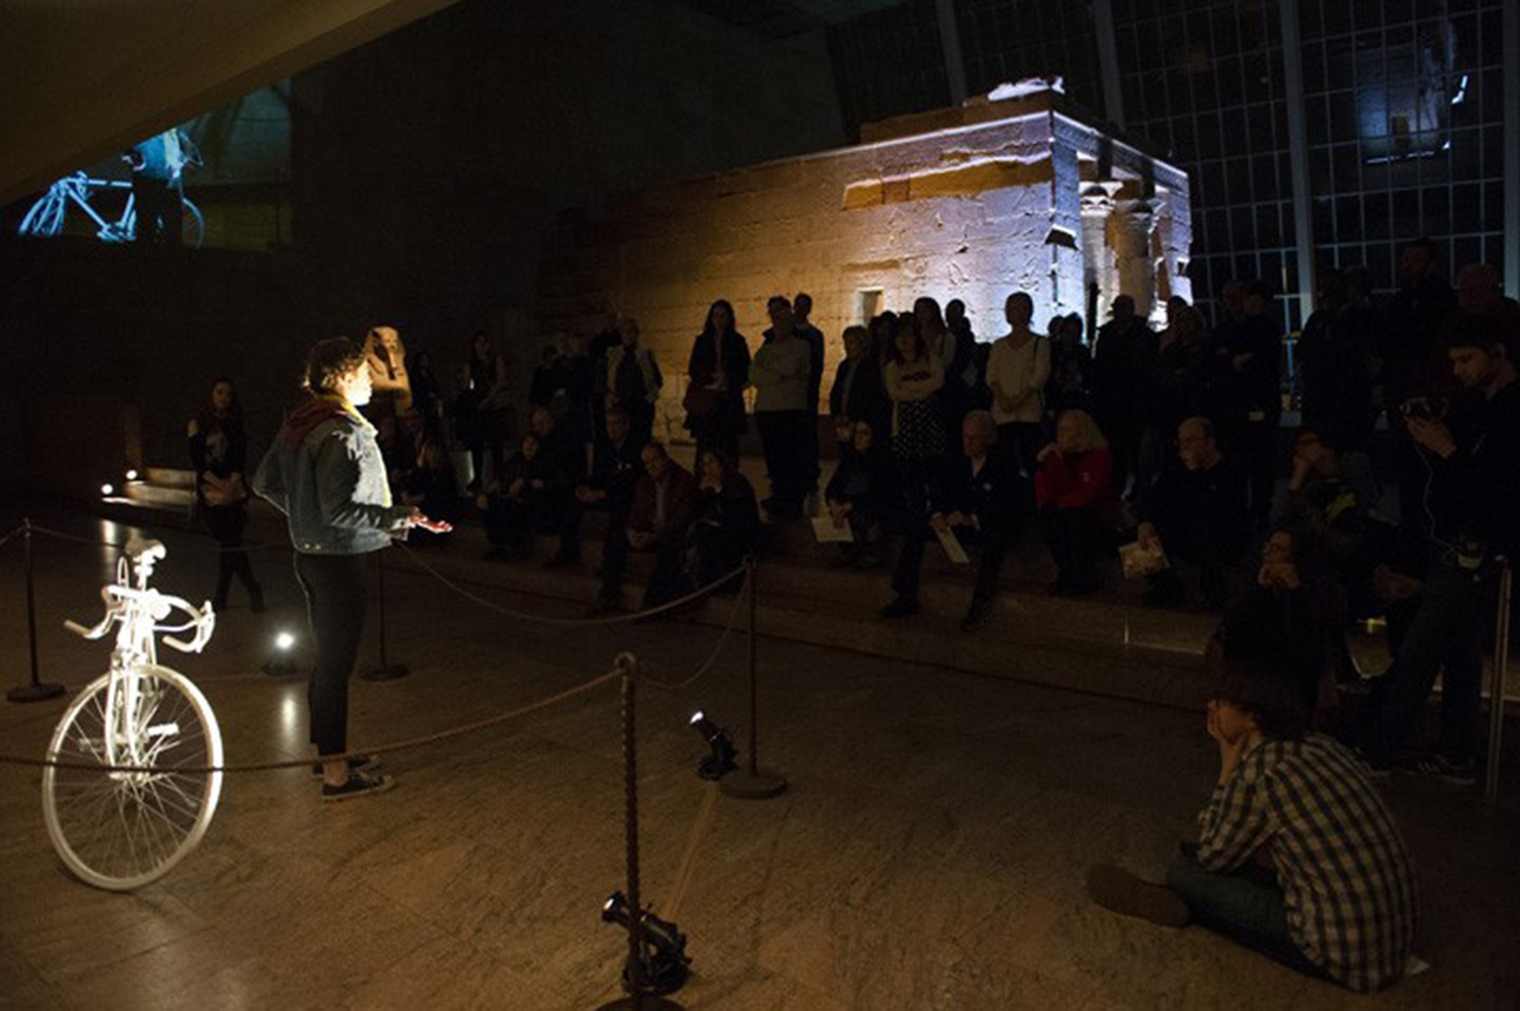 The Civilians, MetLiveArts 2014–15 artist in residence, perform The End and the Beginning outside of the temple, March 2015. A young woman is standing in front of a white bike. The Temple of Dendur is lit up in the background.